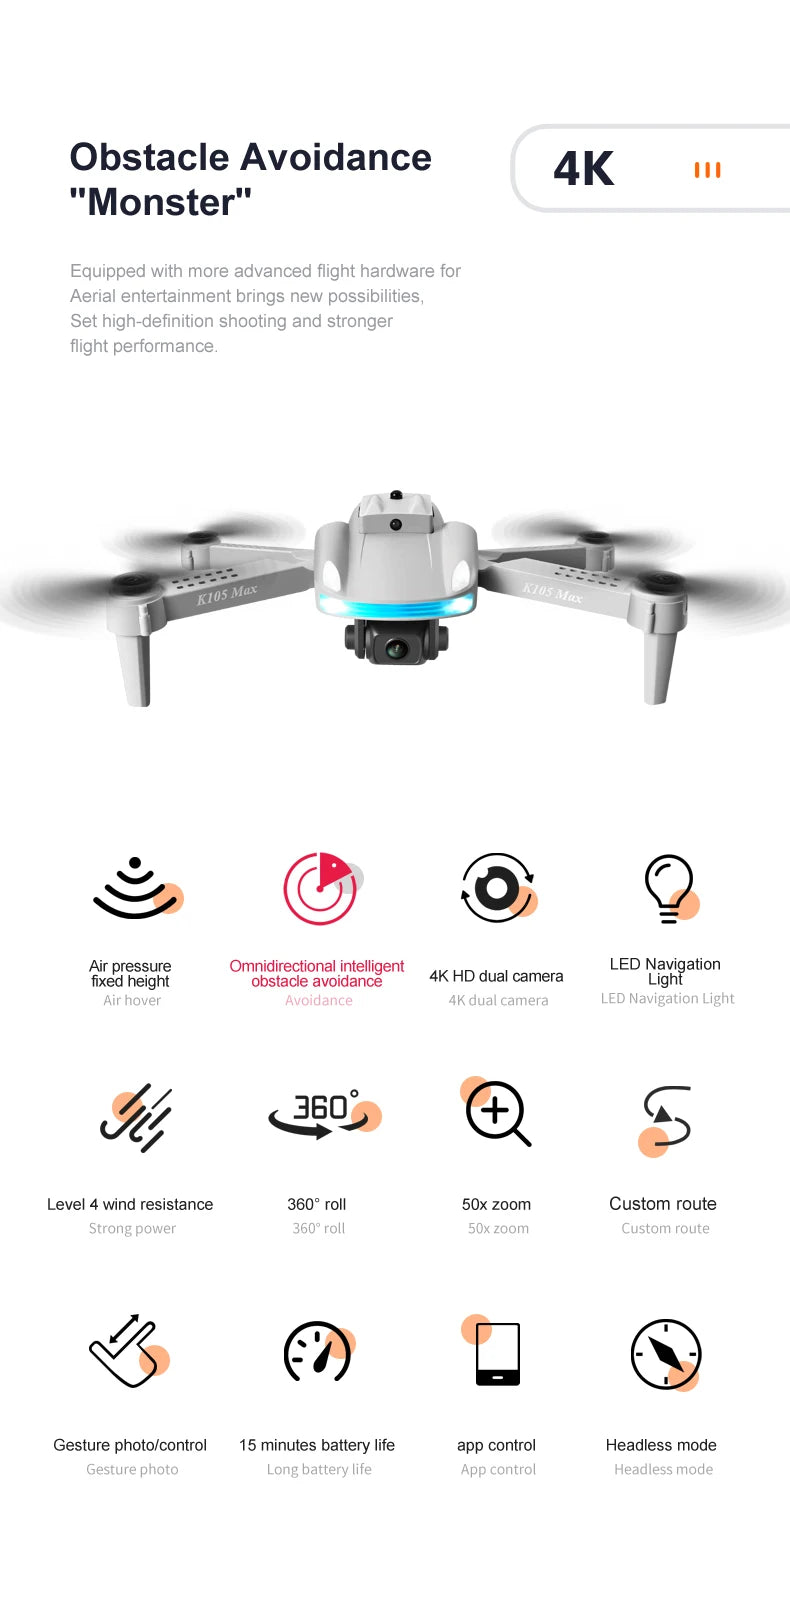 JINHENG K105 Max Drone, obstacle avoidance 4k "monster" equipped with more advanced flight